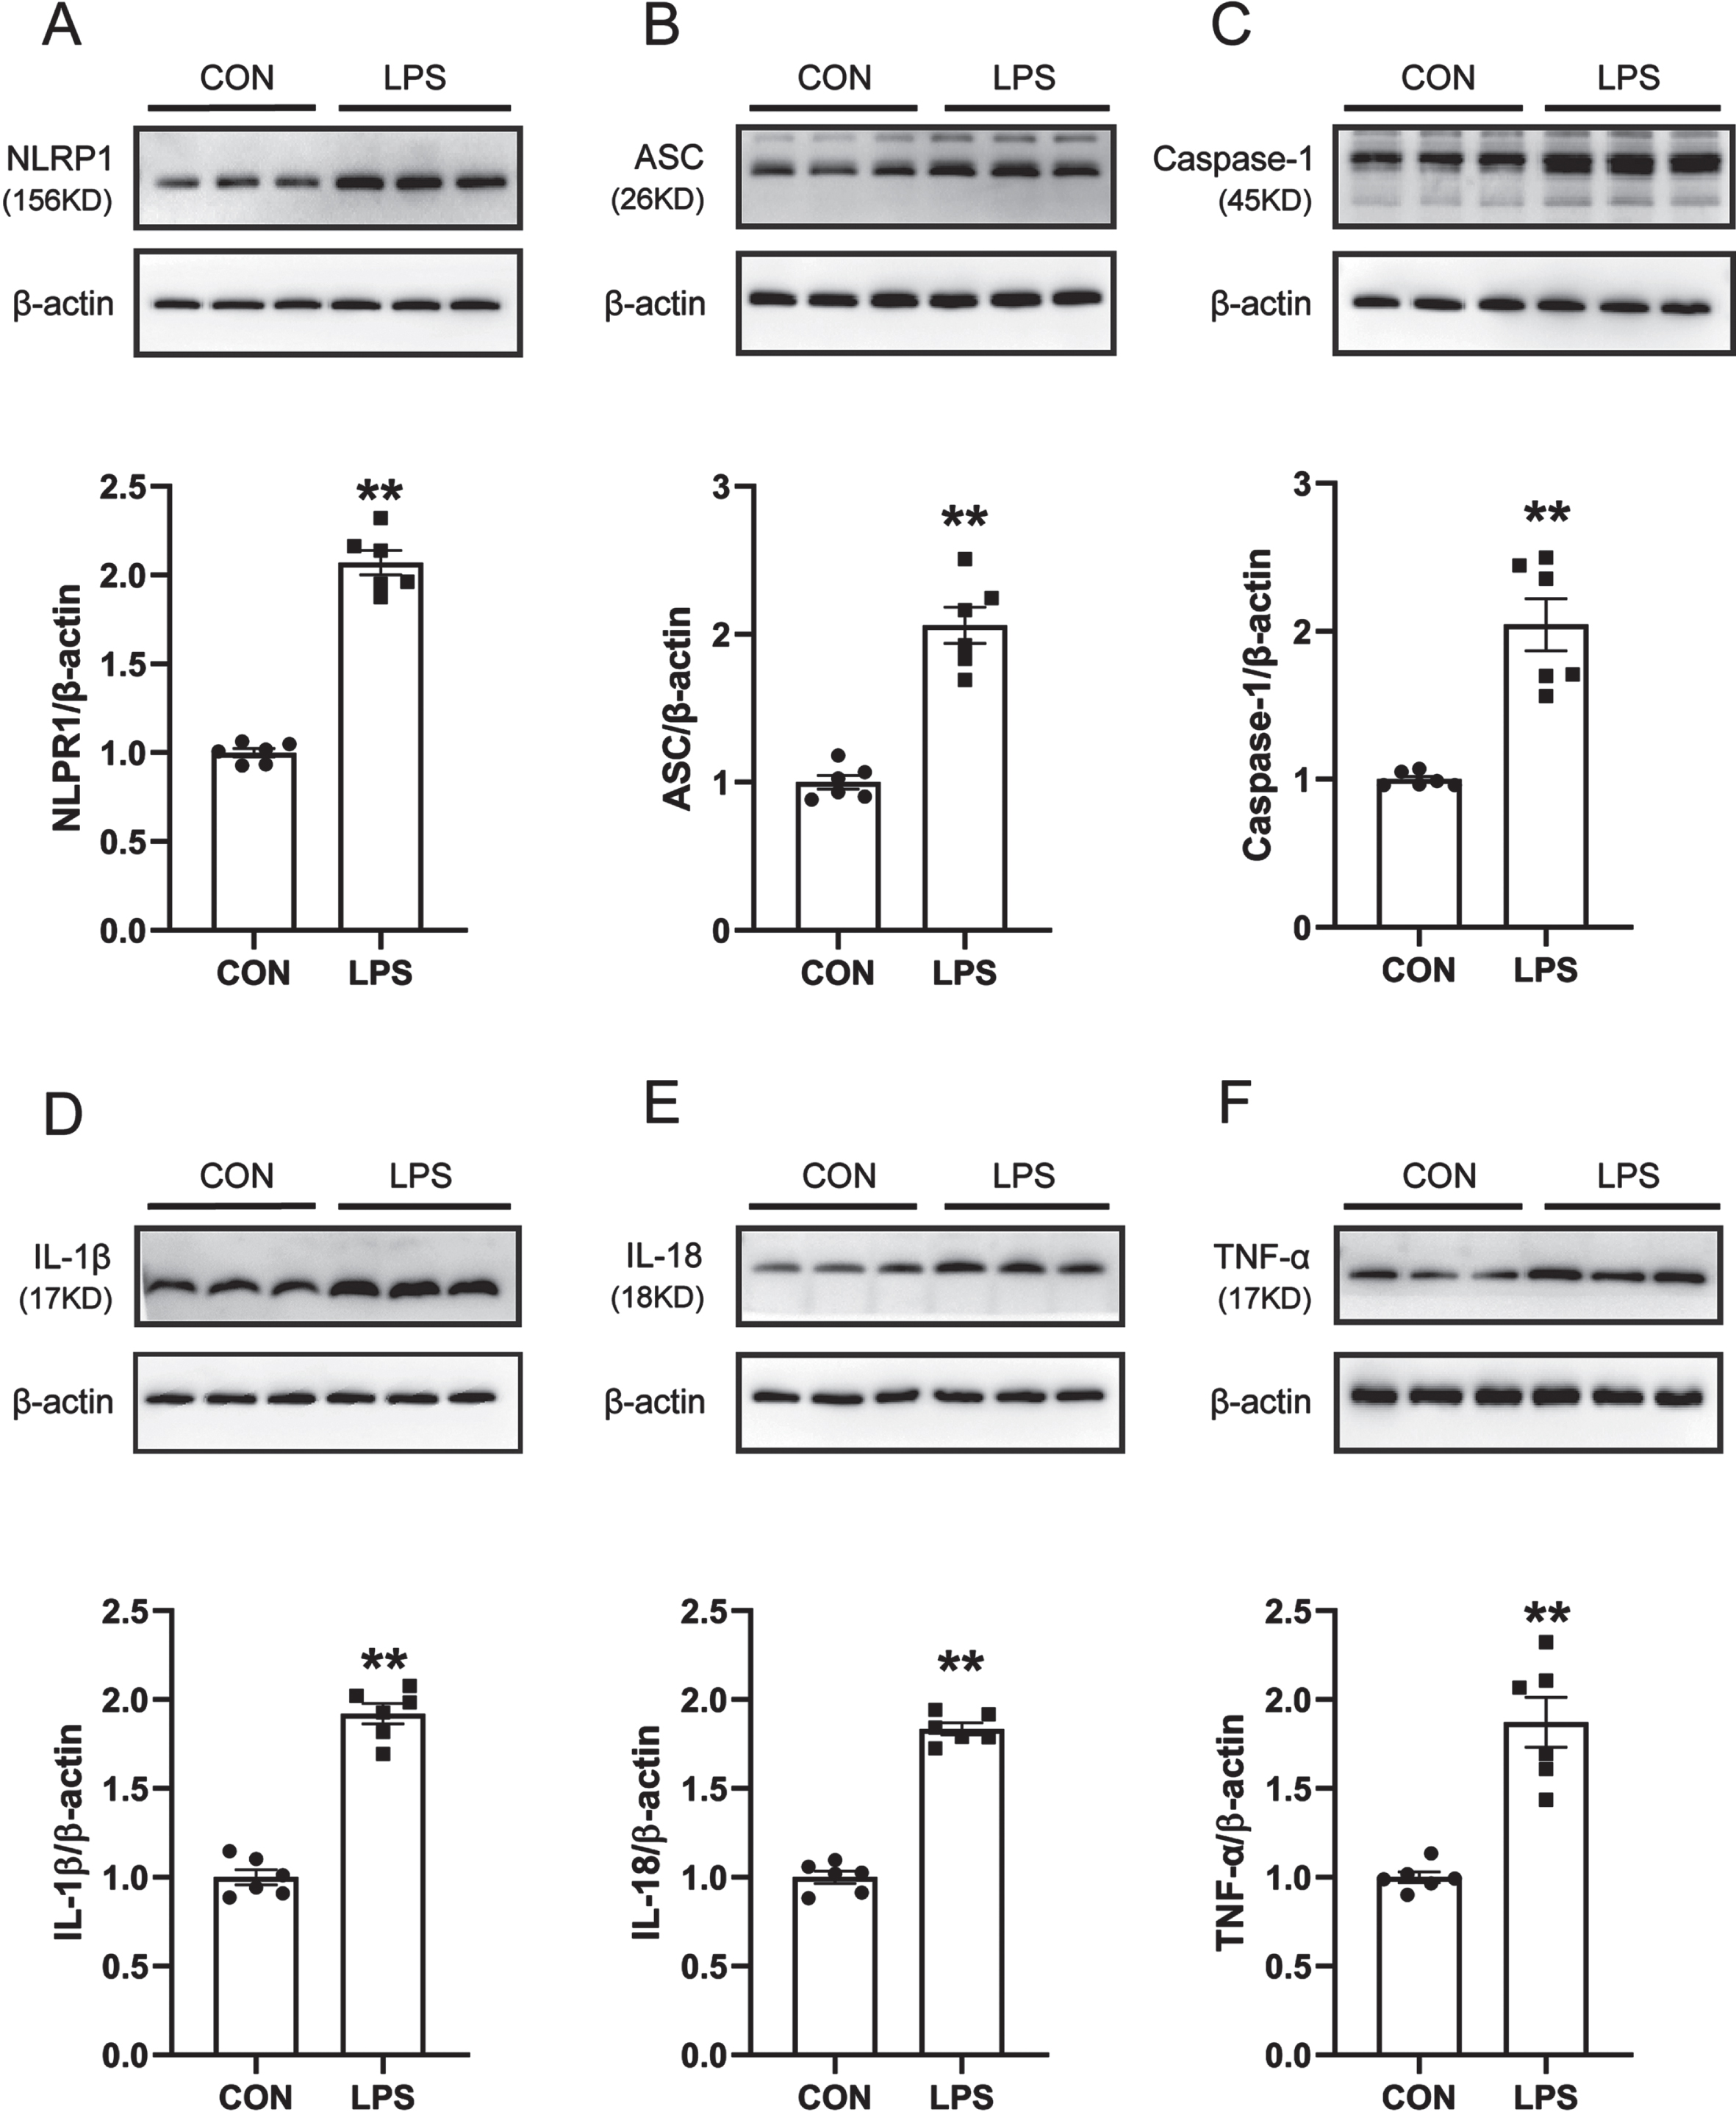 NLRP1 inflammasome activation and related inflammatory response in LPS-induced PD mice model. A) Western blot for NLRP1 protein level. B) Western blot for ASC protein level. C) Western blot for Caspase1 protein level. D) Western blot for IL-1β protein level. E) Western blot for IL-18 protein level. F) Western blot for TNF-α protein level. Data are expressed as mean±SEM (n = 6). **p < 0.01 vs. the control group.